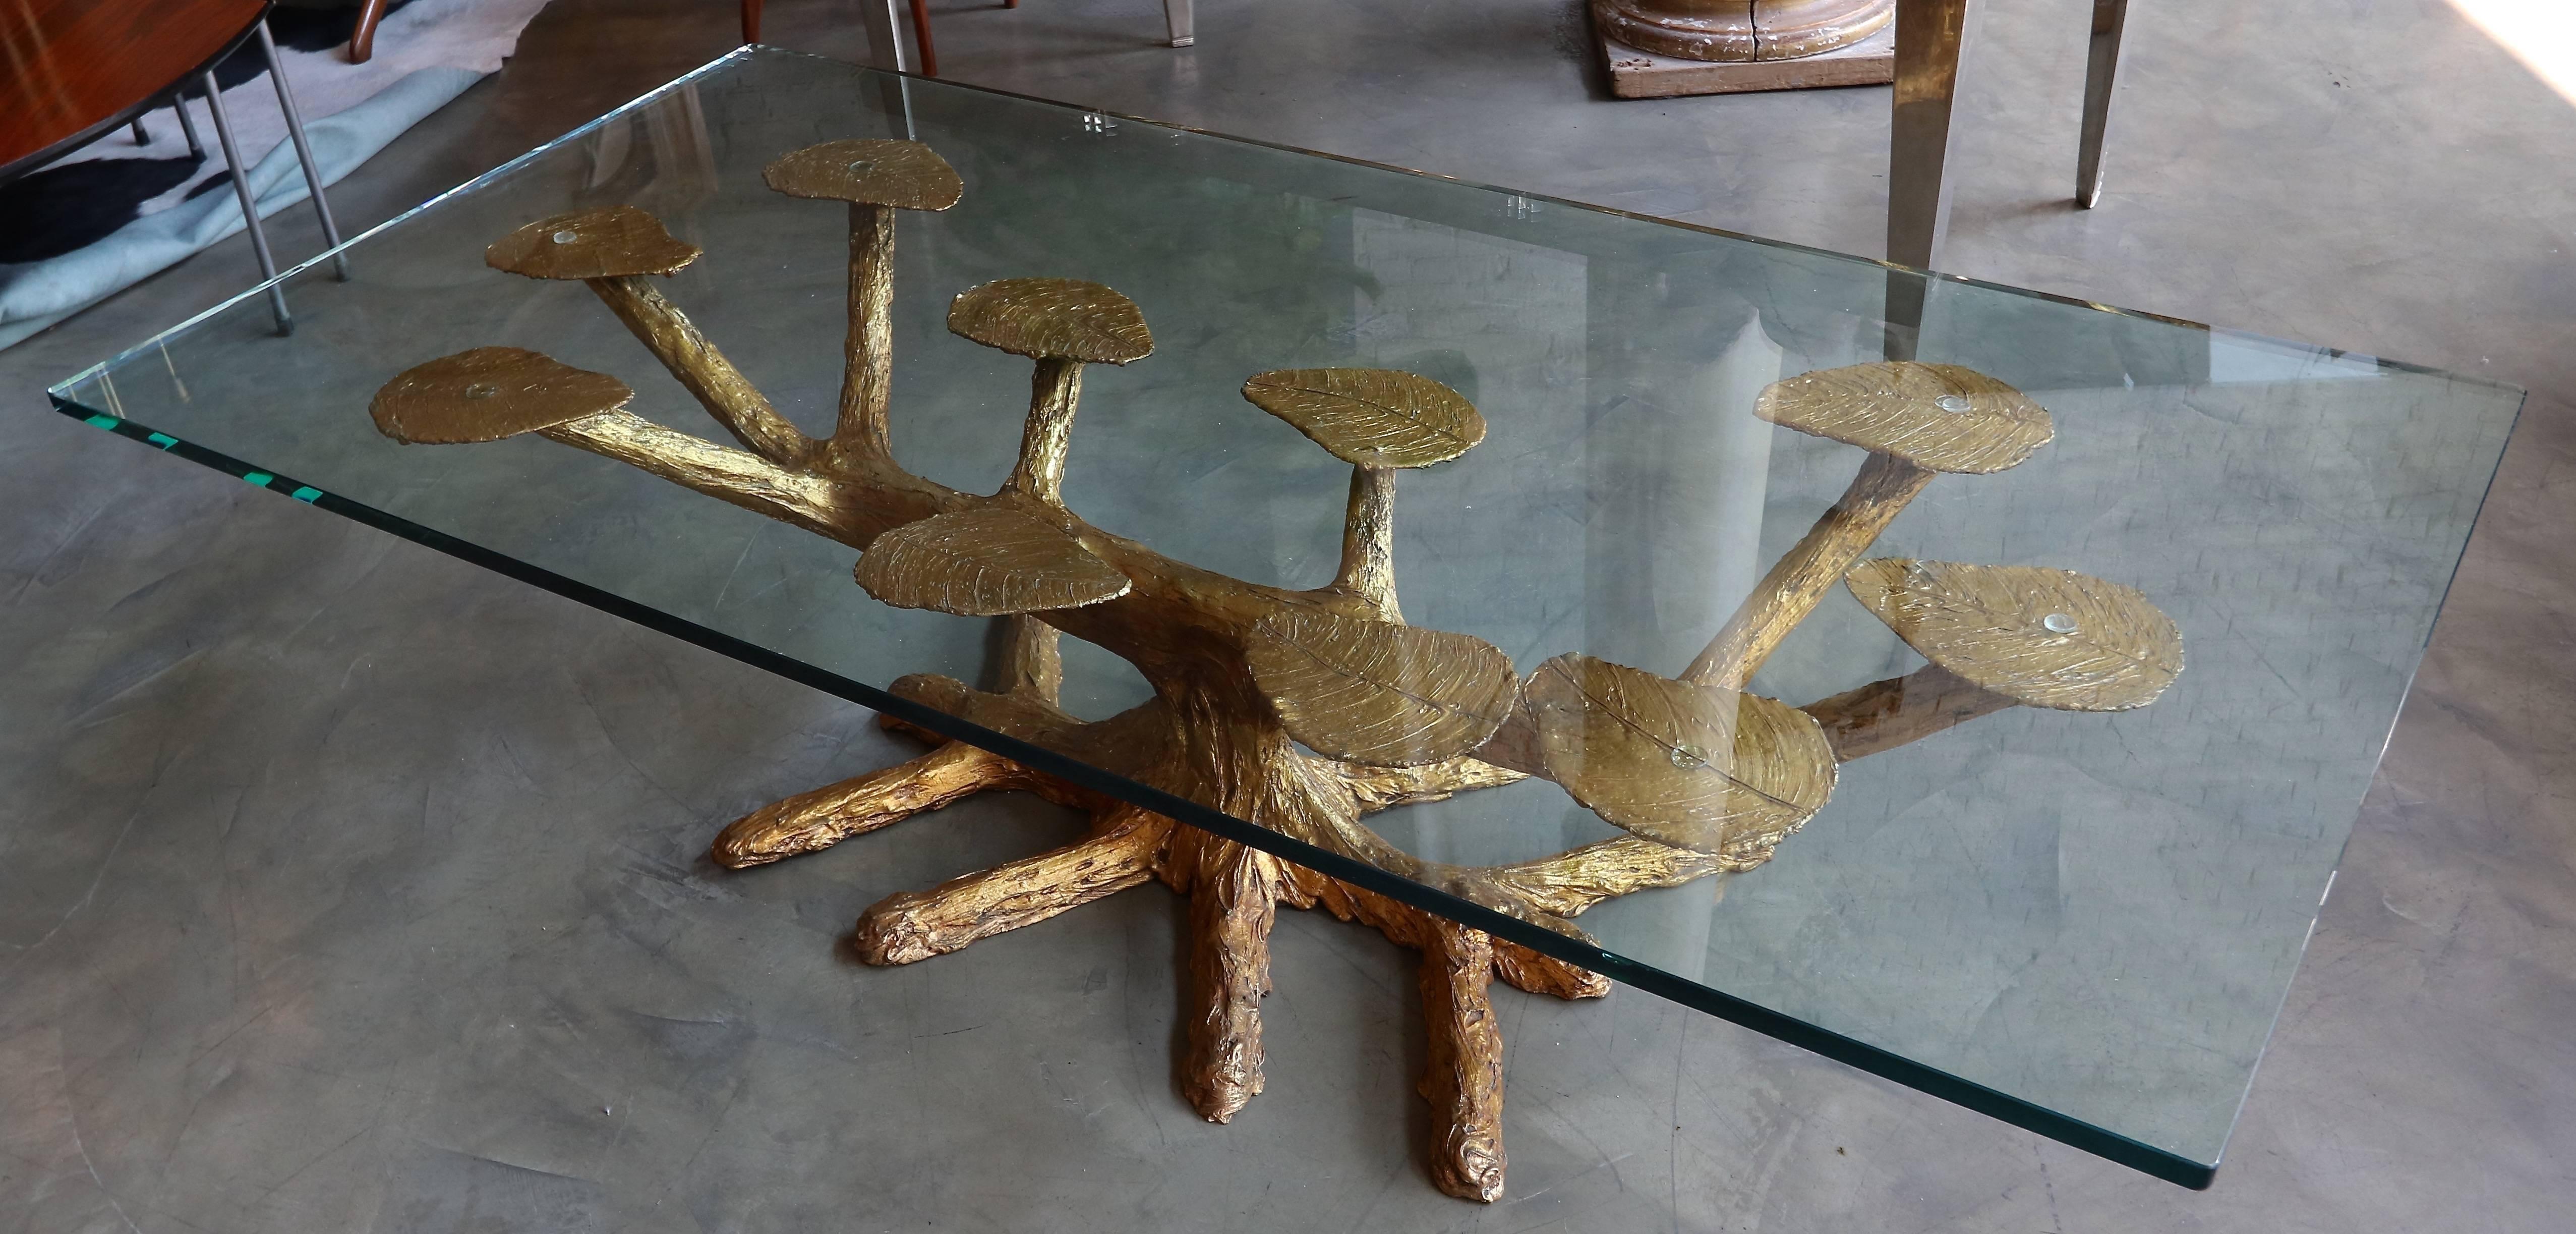 Metal faux bois 1960s coffee table with gold finish in the shape of a tree. Glass top sits on leaves.